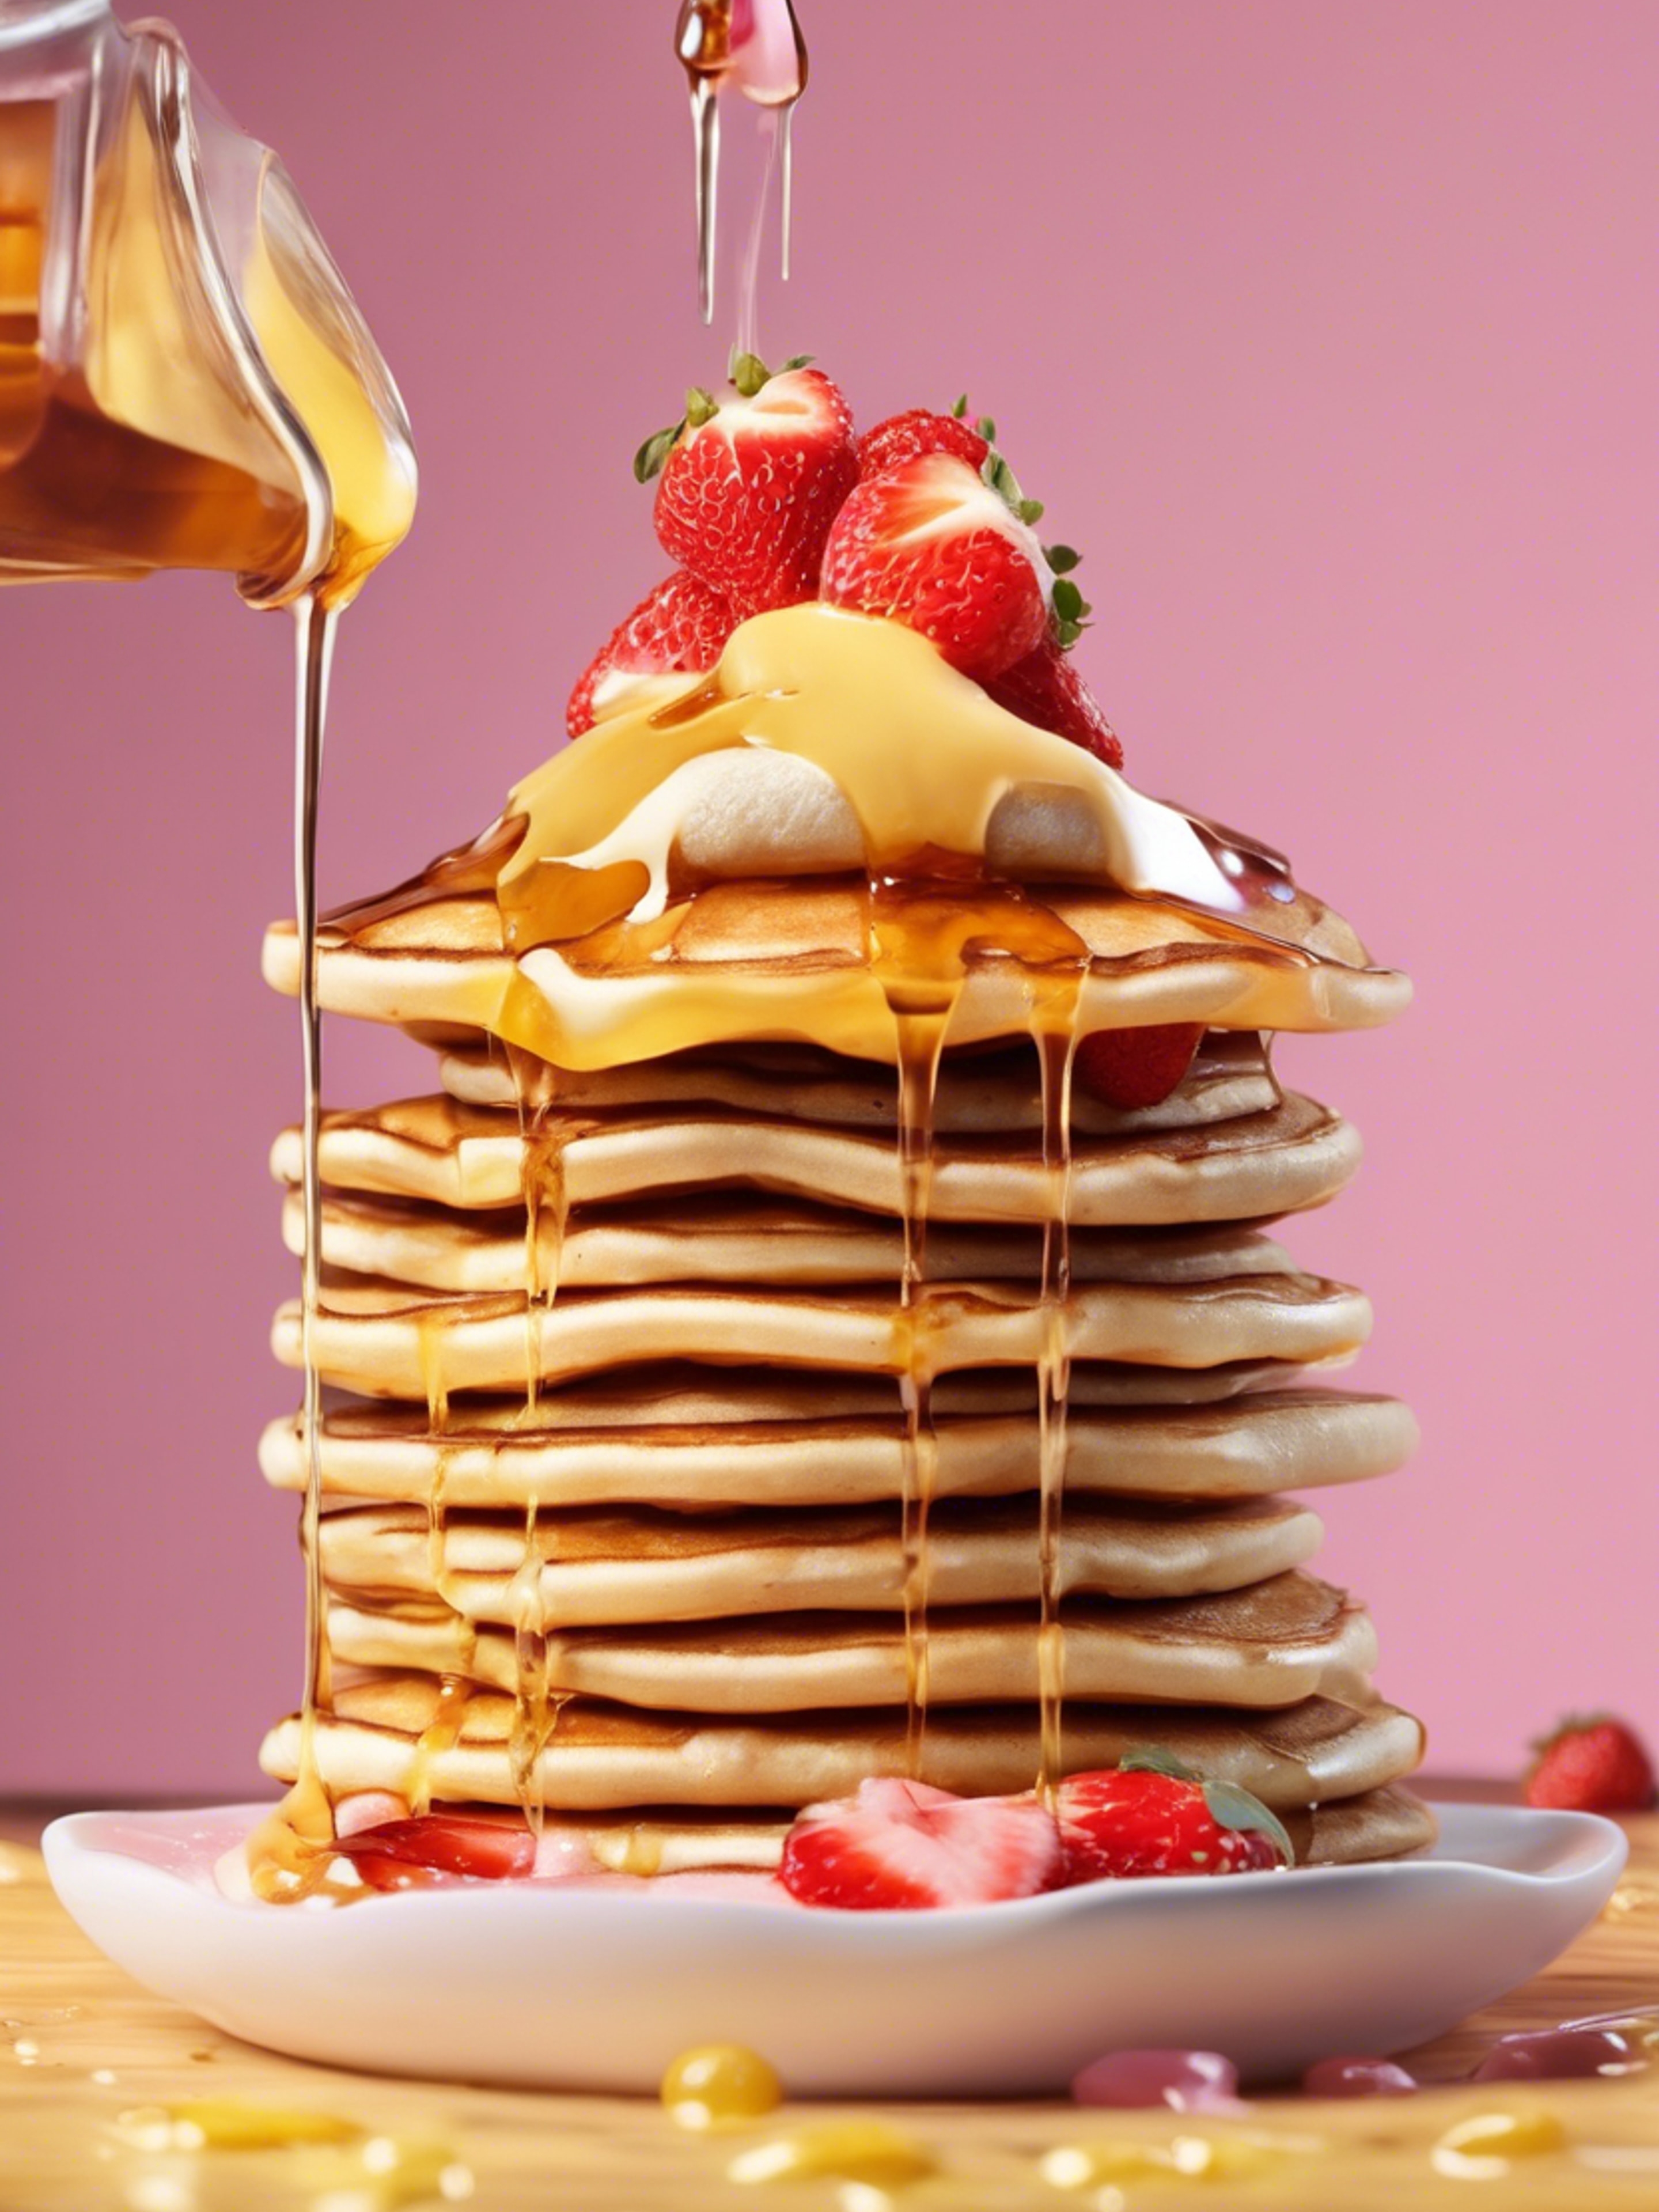 Beige kawaii pancakes stacked with a melted butter and syrup, topped with mini strawberry slices. Tapet[6cf29e03a904430684e0]